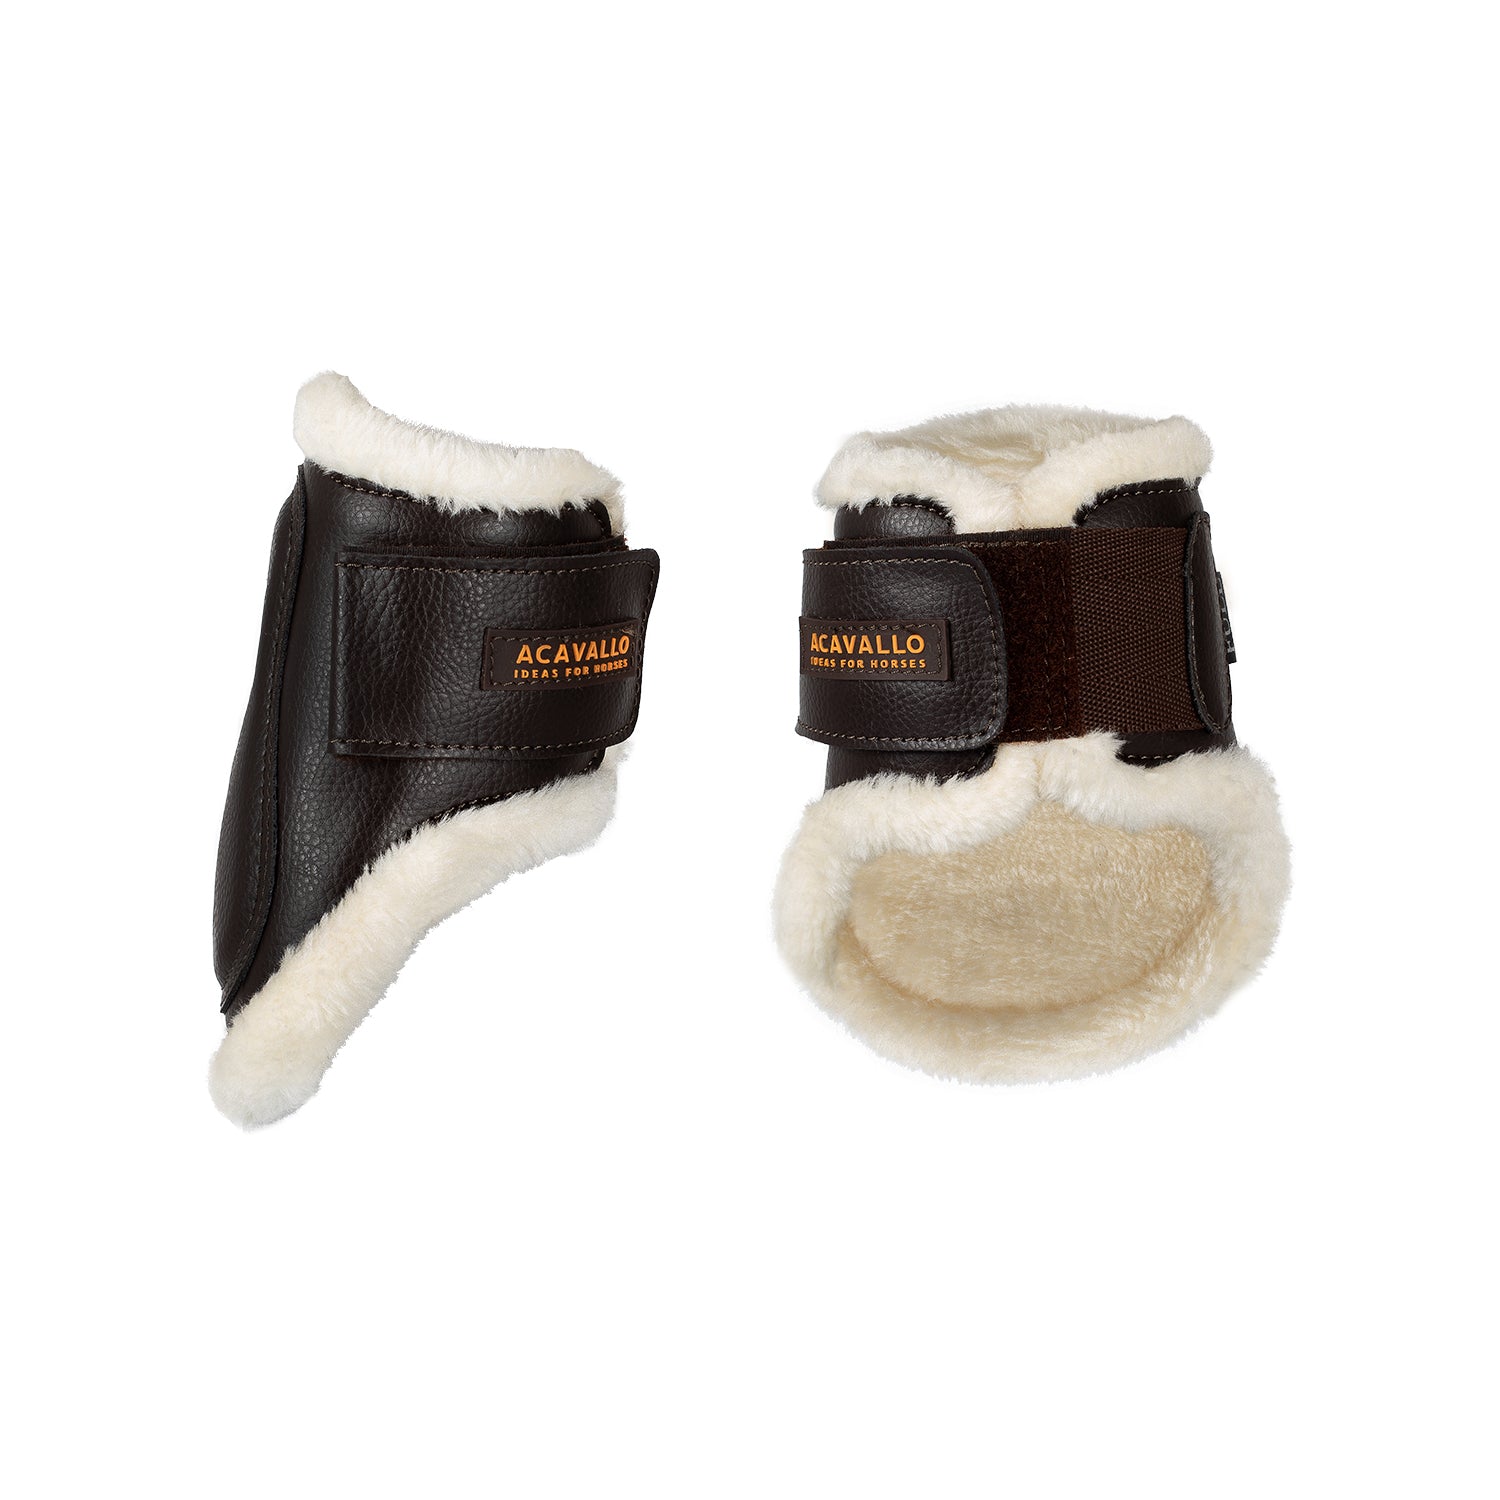 Jumping fetlock boots with faux fur